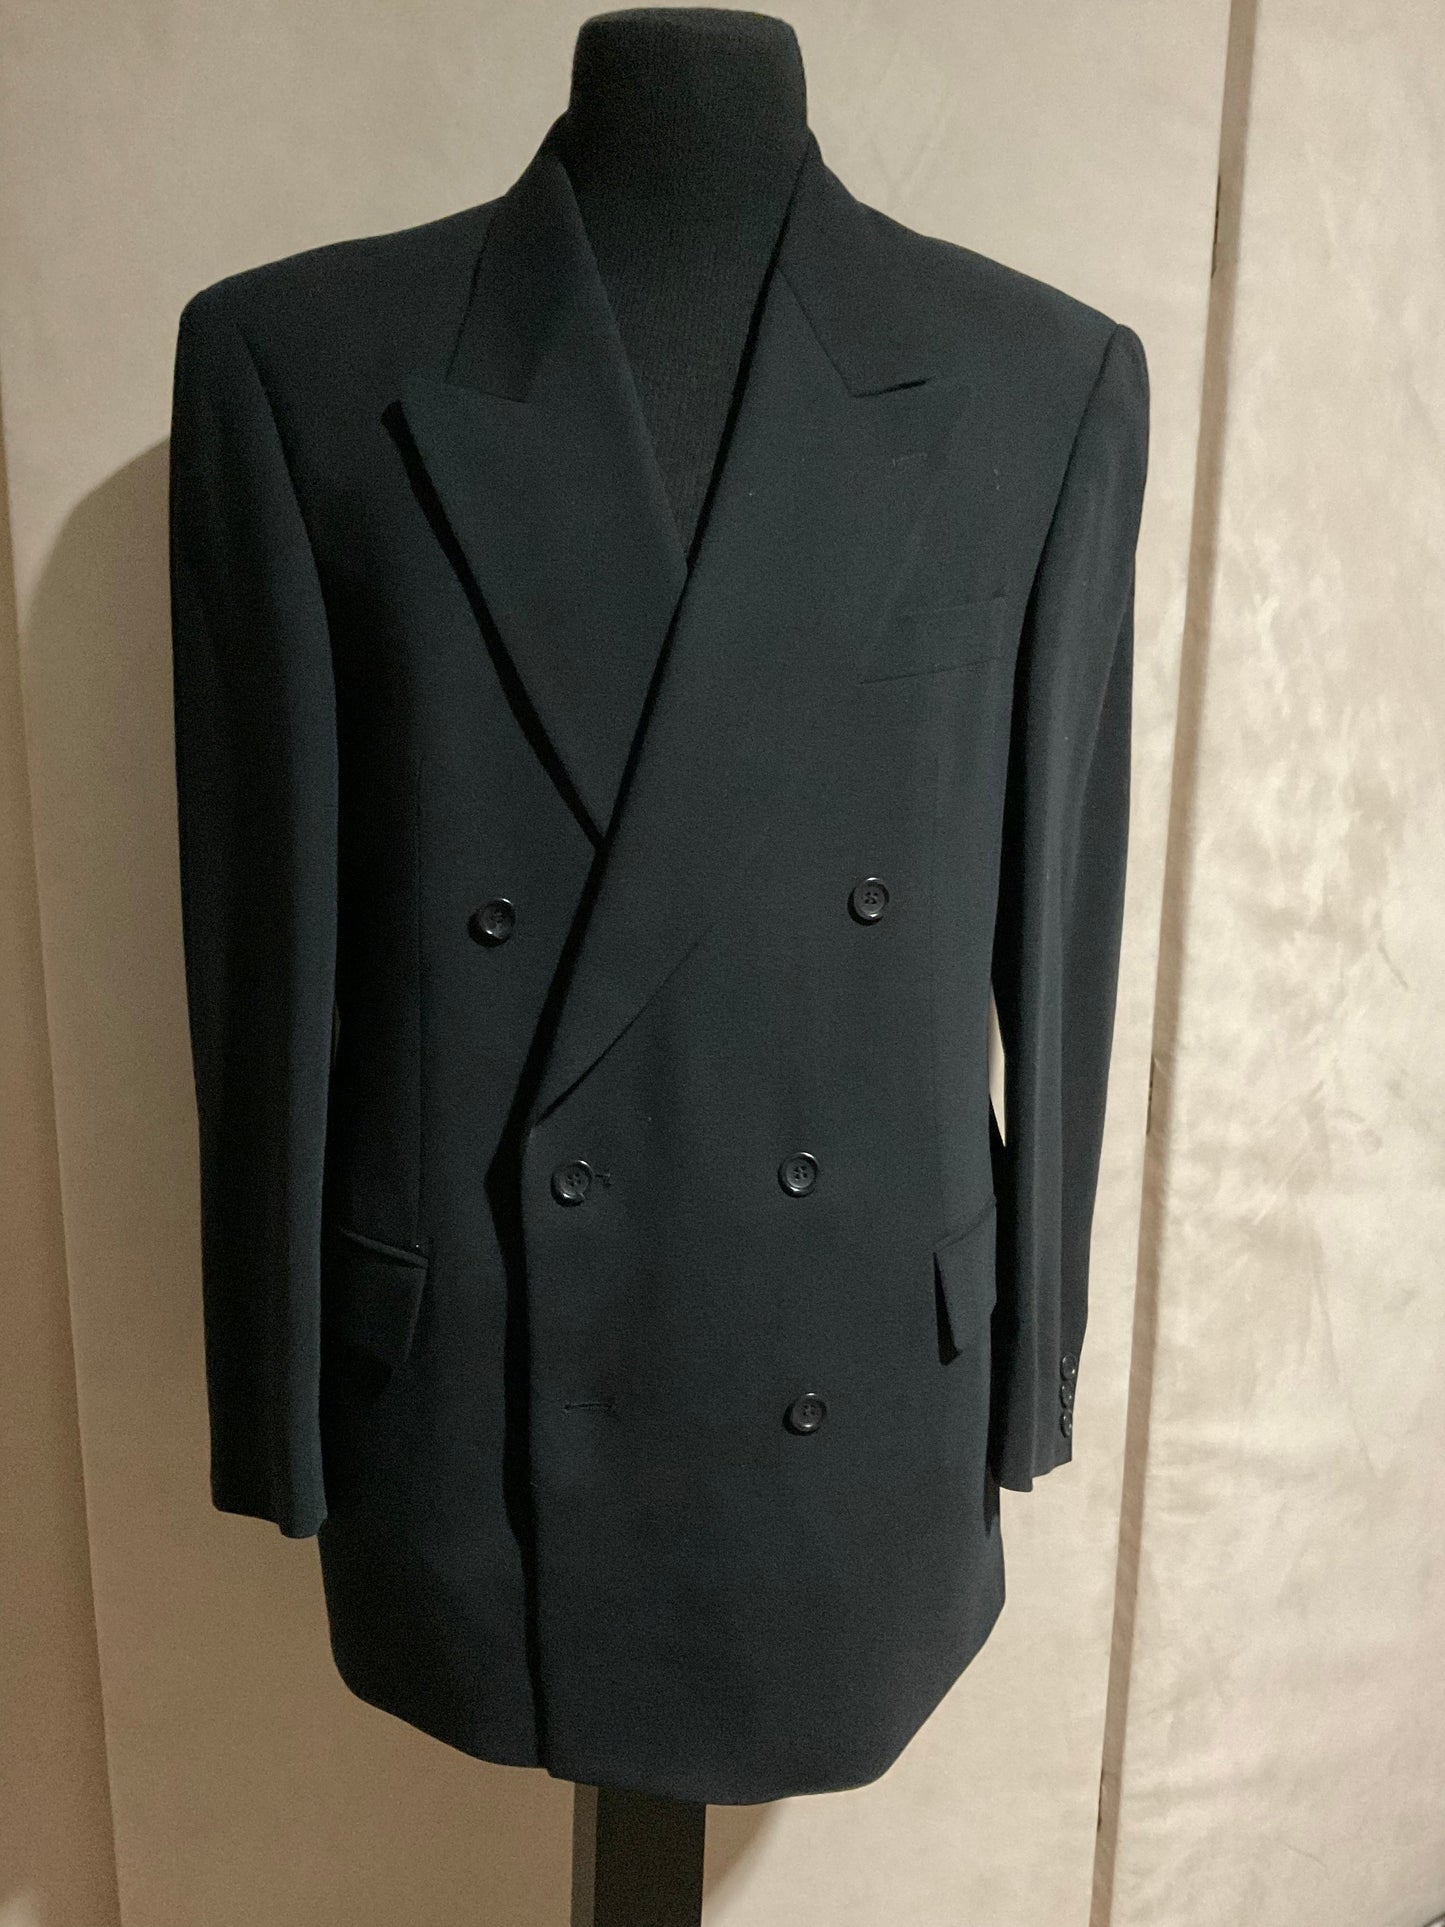 R P SUIT / DOUBLE BREASTED / BLACK CREPE / 40 REG OR LONG / MADE IN EUROPE